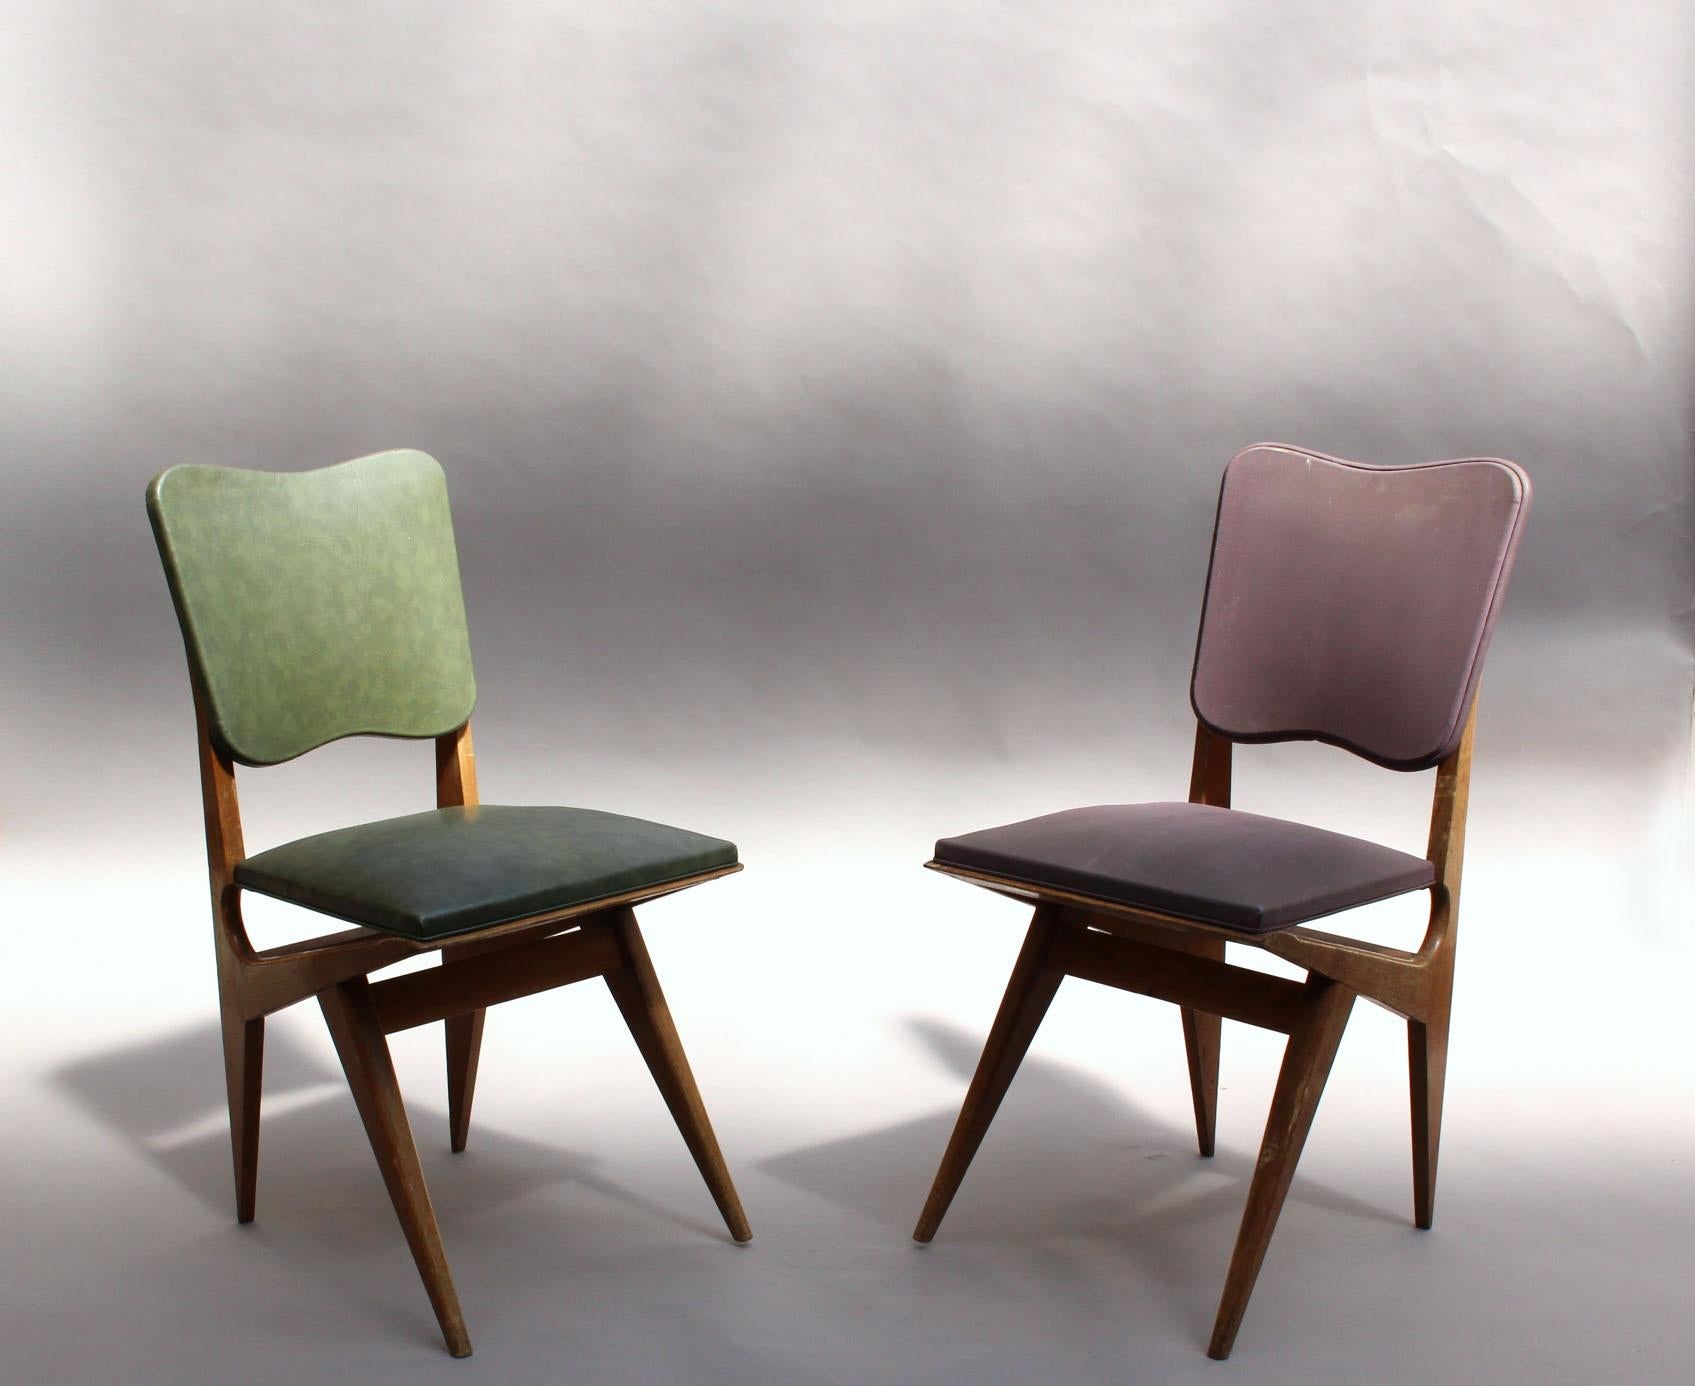 Two French midcentury dining / side chairs in solid oak.